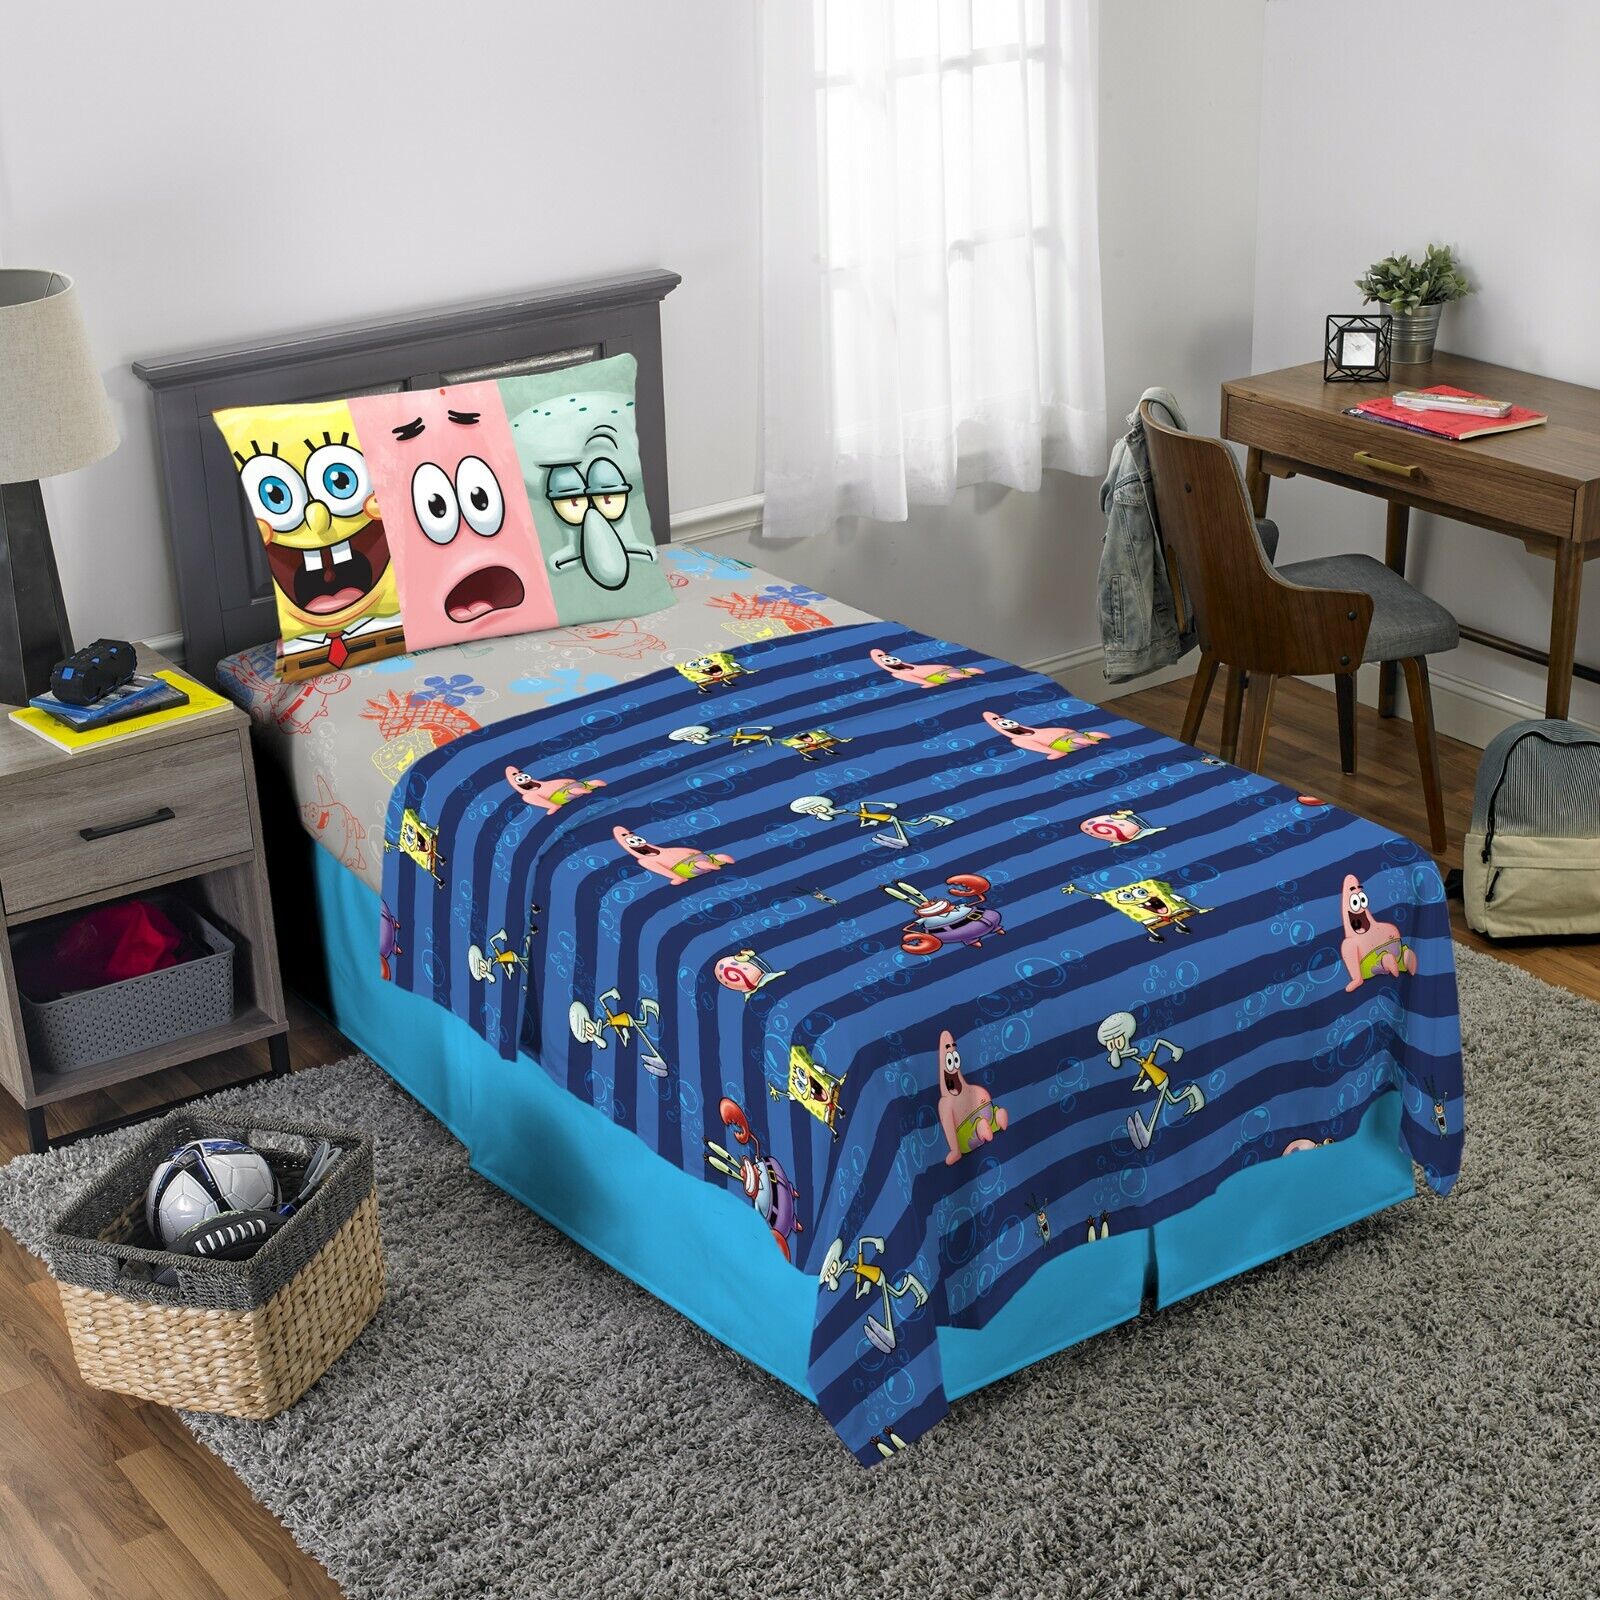 Blippi Bedding For Kids: The 10 Best Twin Blippi Sheets Your Child Will Love